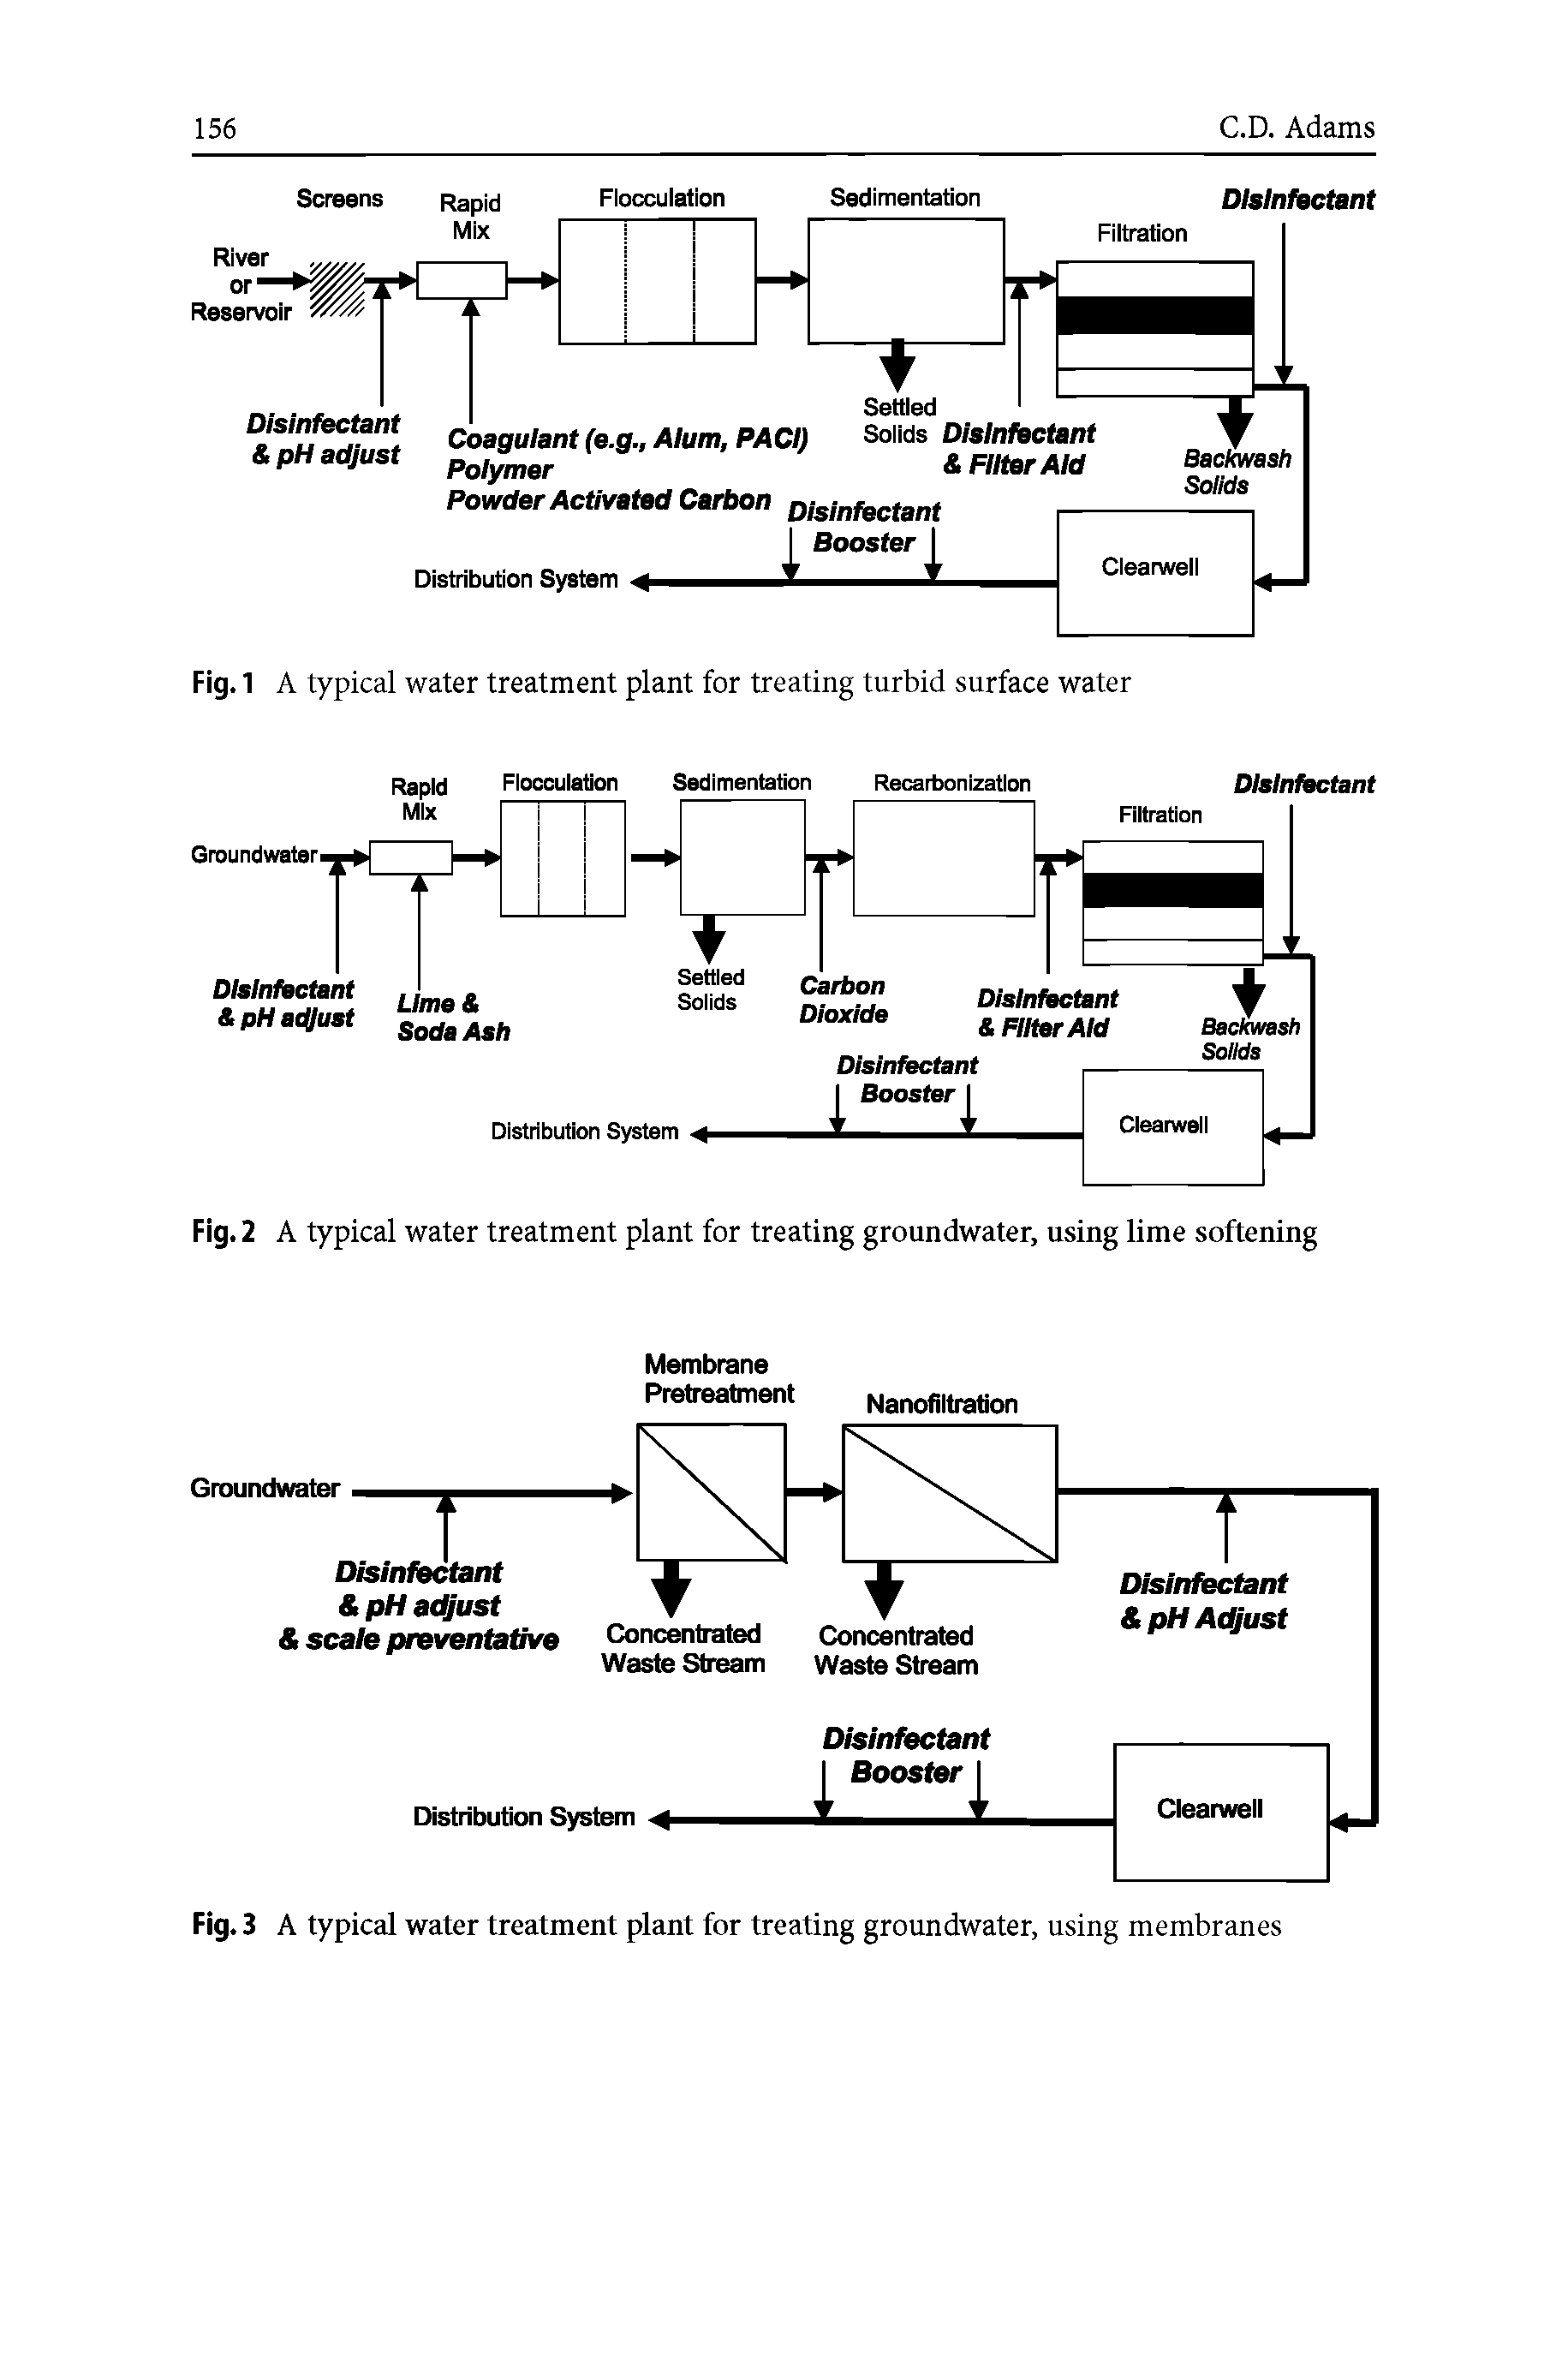 Fig. 2 A typical water treatment plant for treating groundwater, using lime softening...